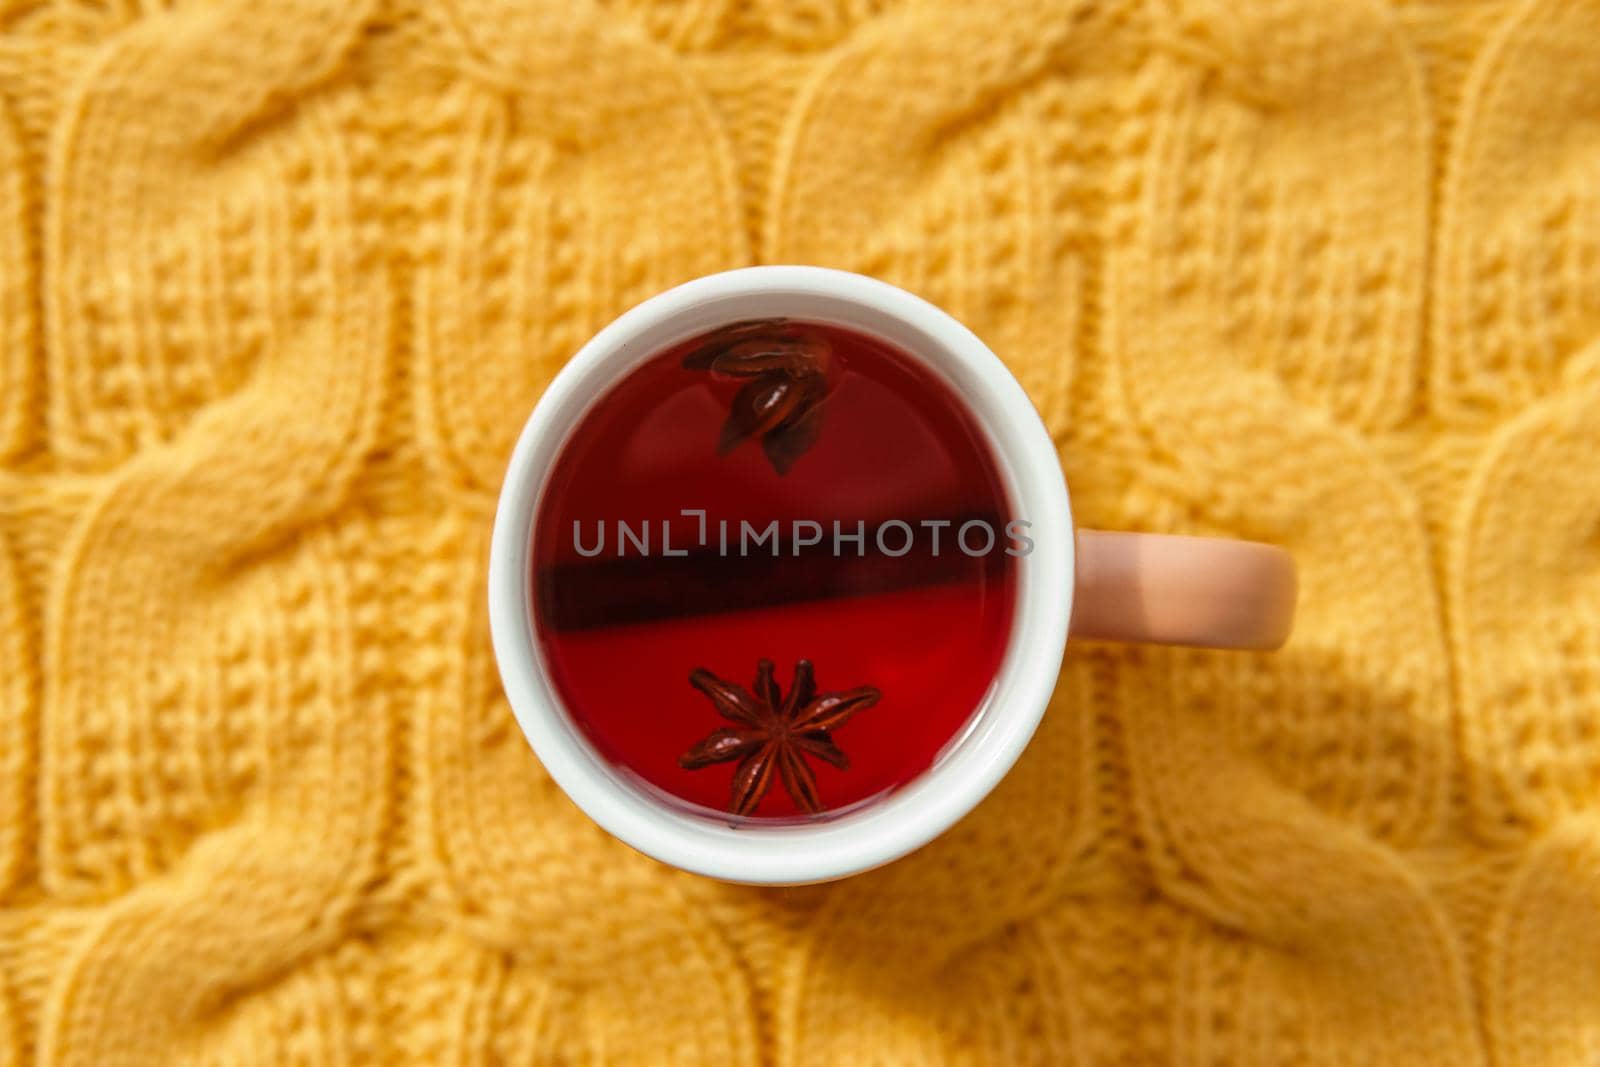 Karkade tea in an orange cup on an orange knitted background. The concept of the autumn season, natural colors. Red fruit tea.